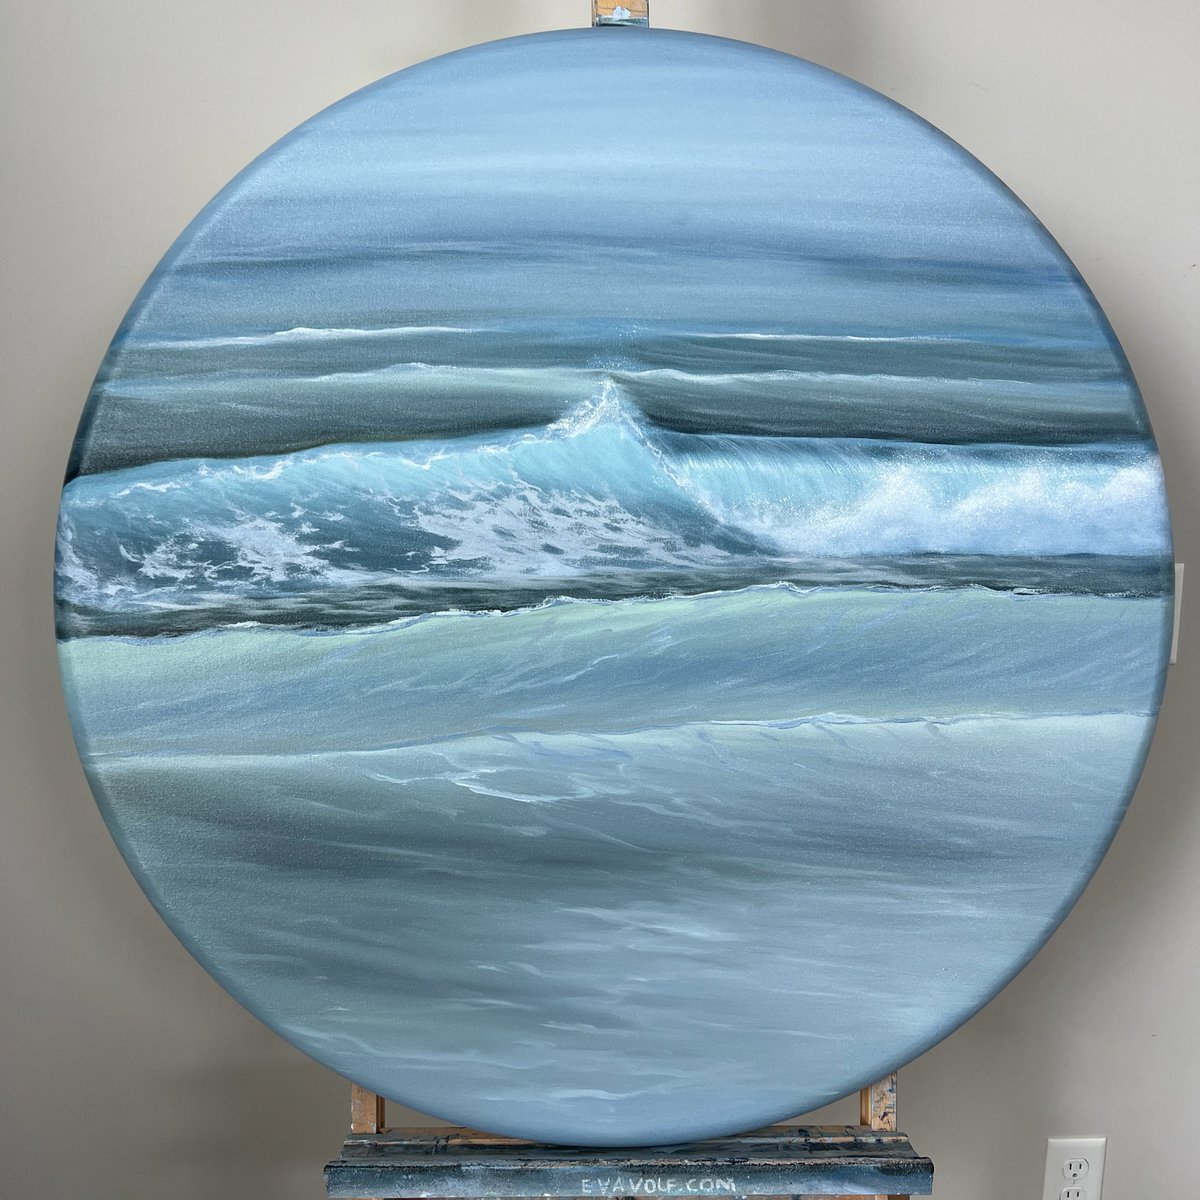 A work in progress on my easel. What do you think about this palette?
#oceanart #oilpainting